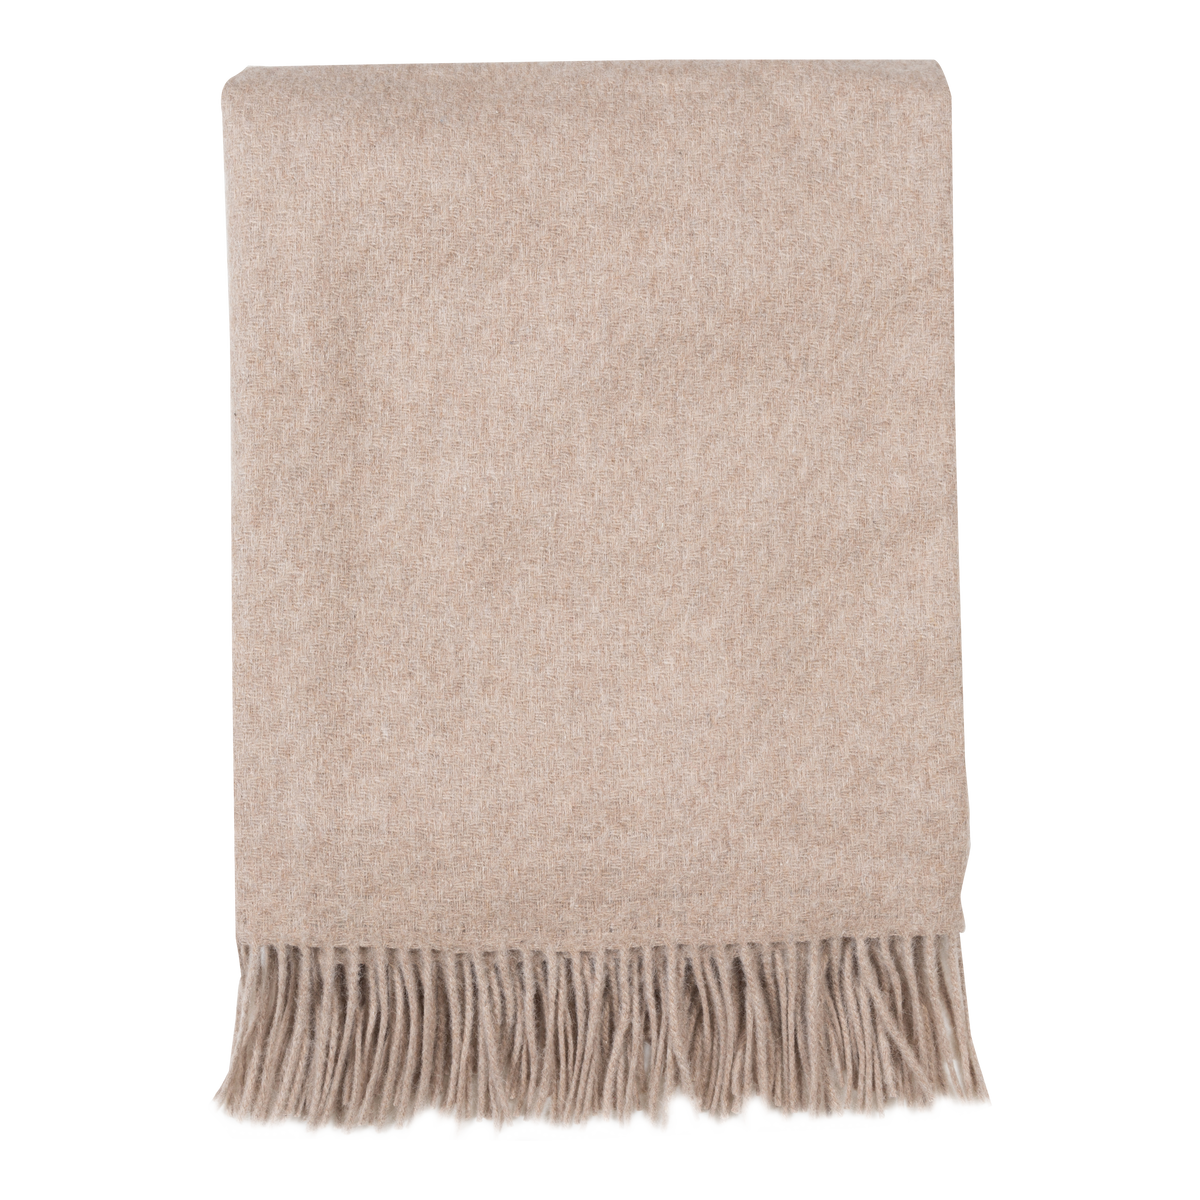 Luxurious and desirable, the Solid Alpaca/Lambswool Throw in beige features an exquisitely soft fabric that is made from a blend of alpaca and lambswool fibre.